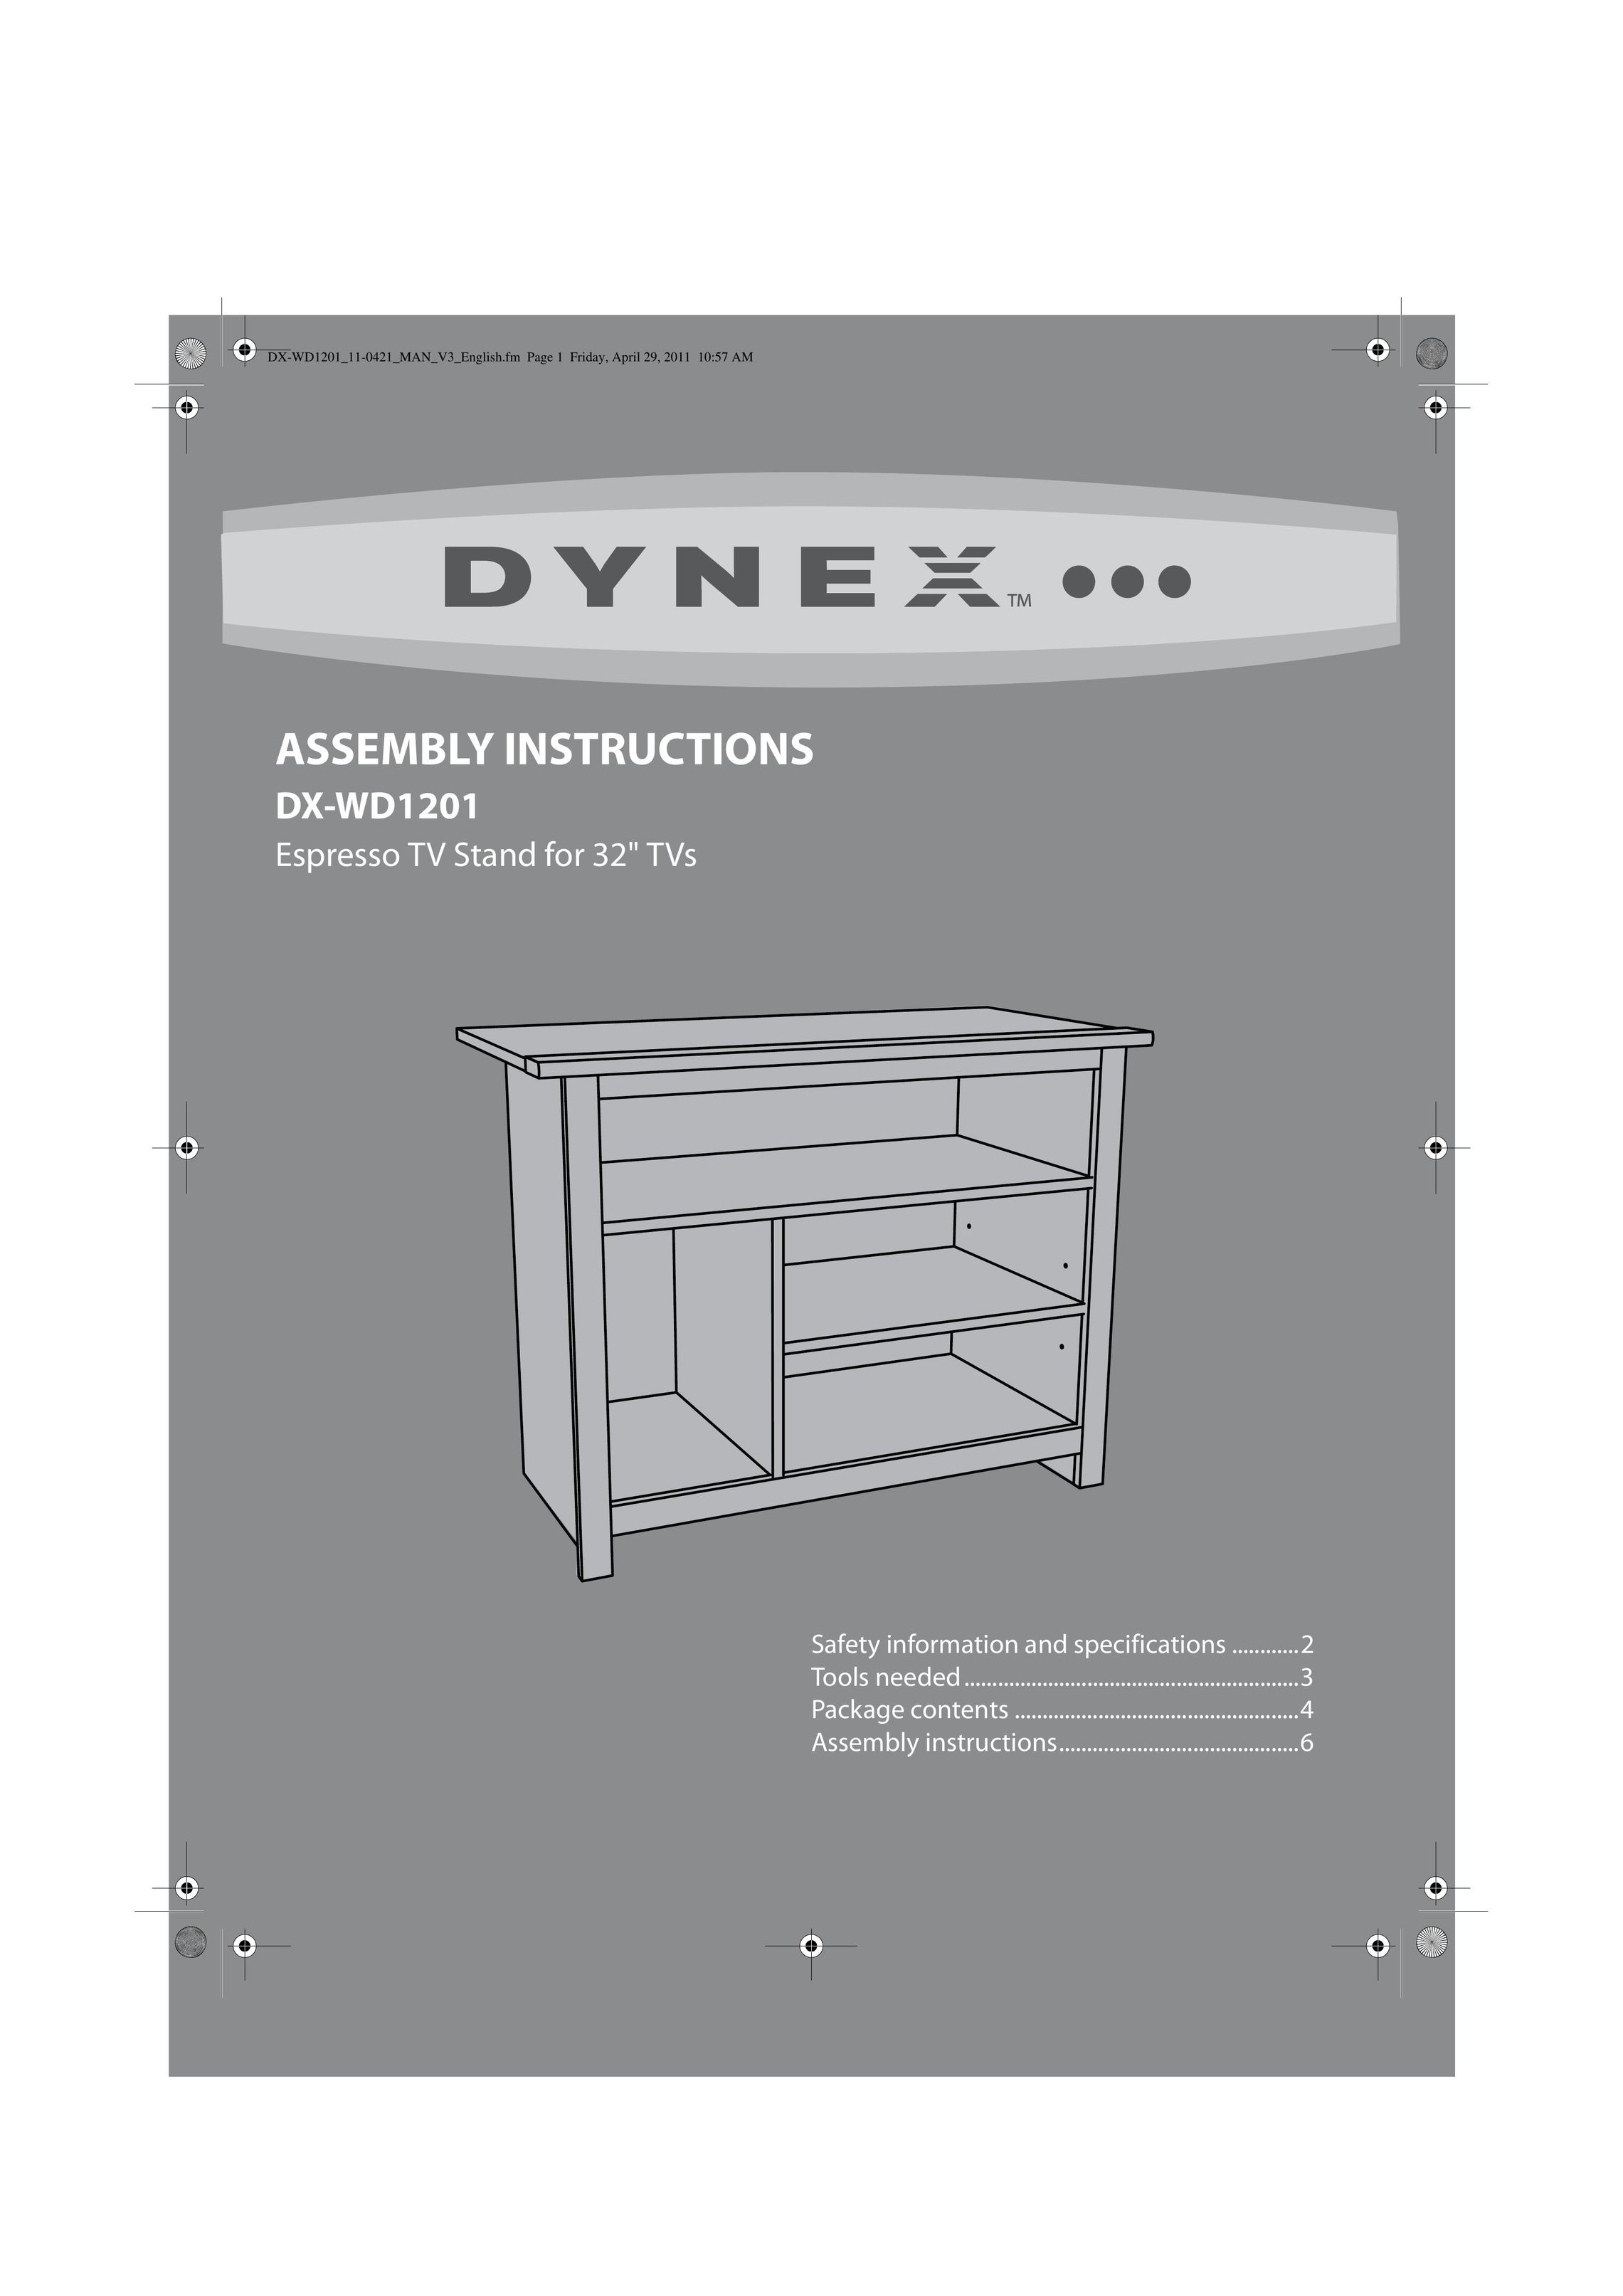 Dynex DX-WD1201 TV Video Accessories User Manual